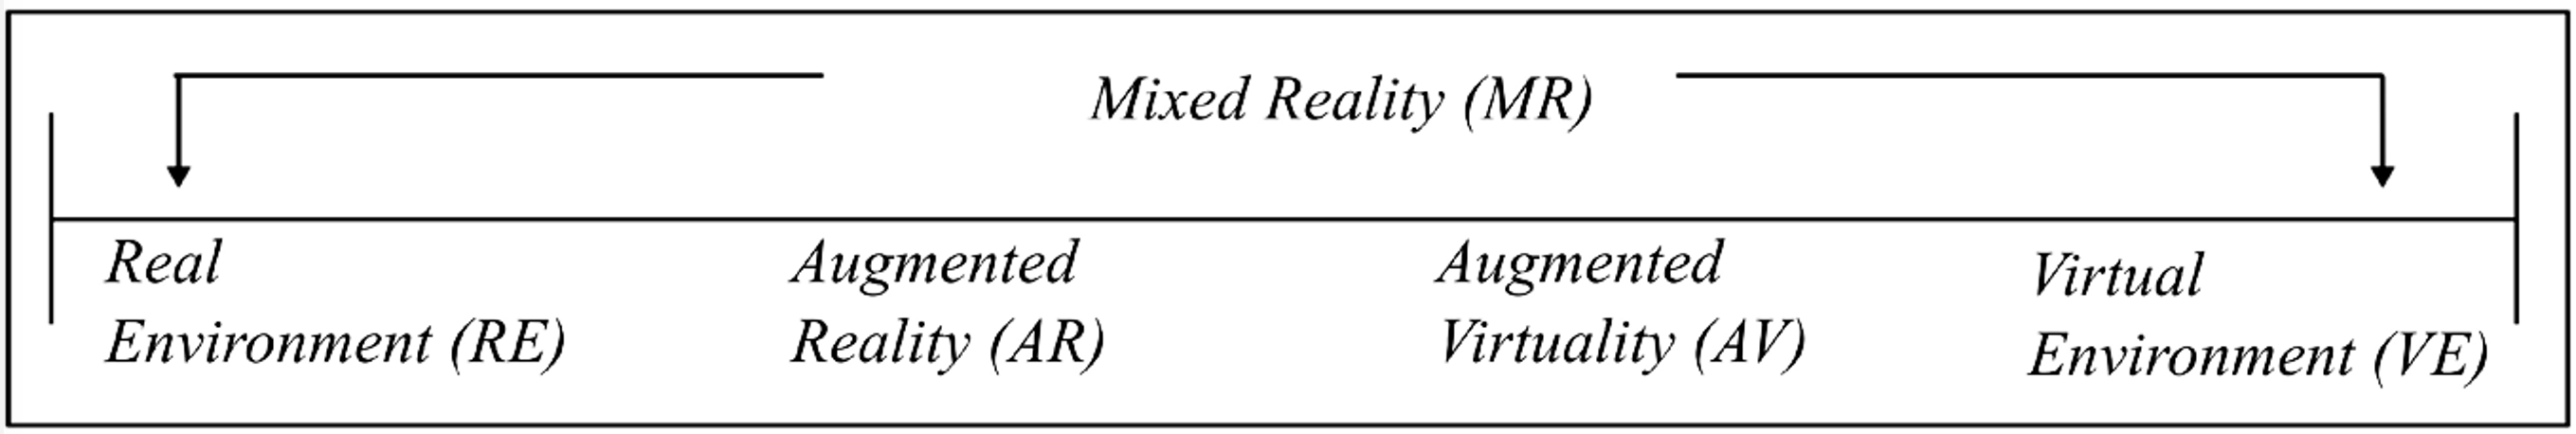 Fig. 1. Milgram’s reality-virtuality continuum. Adapted from [1]